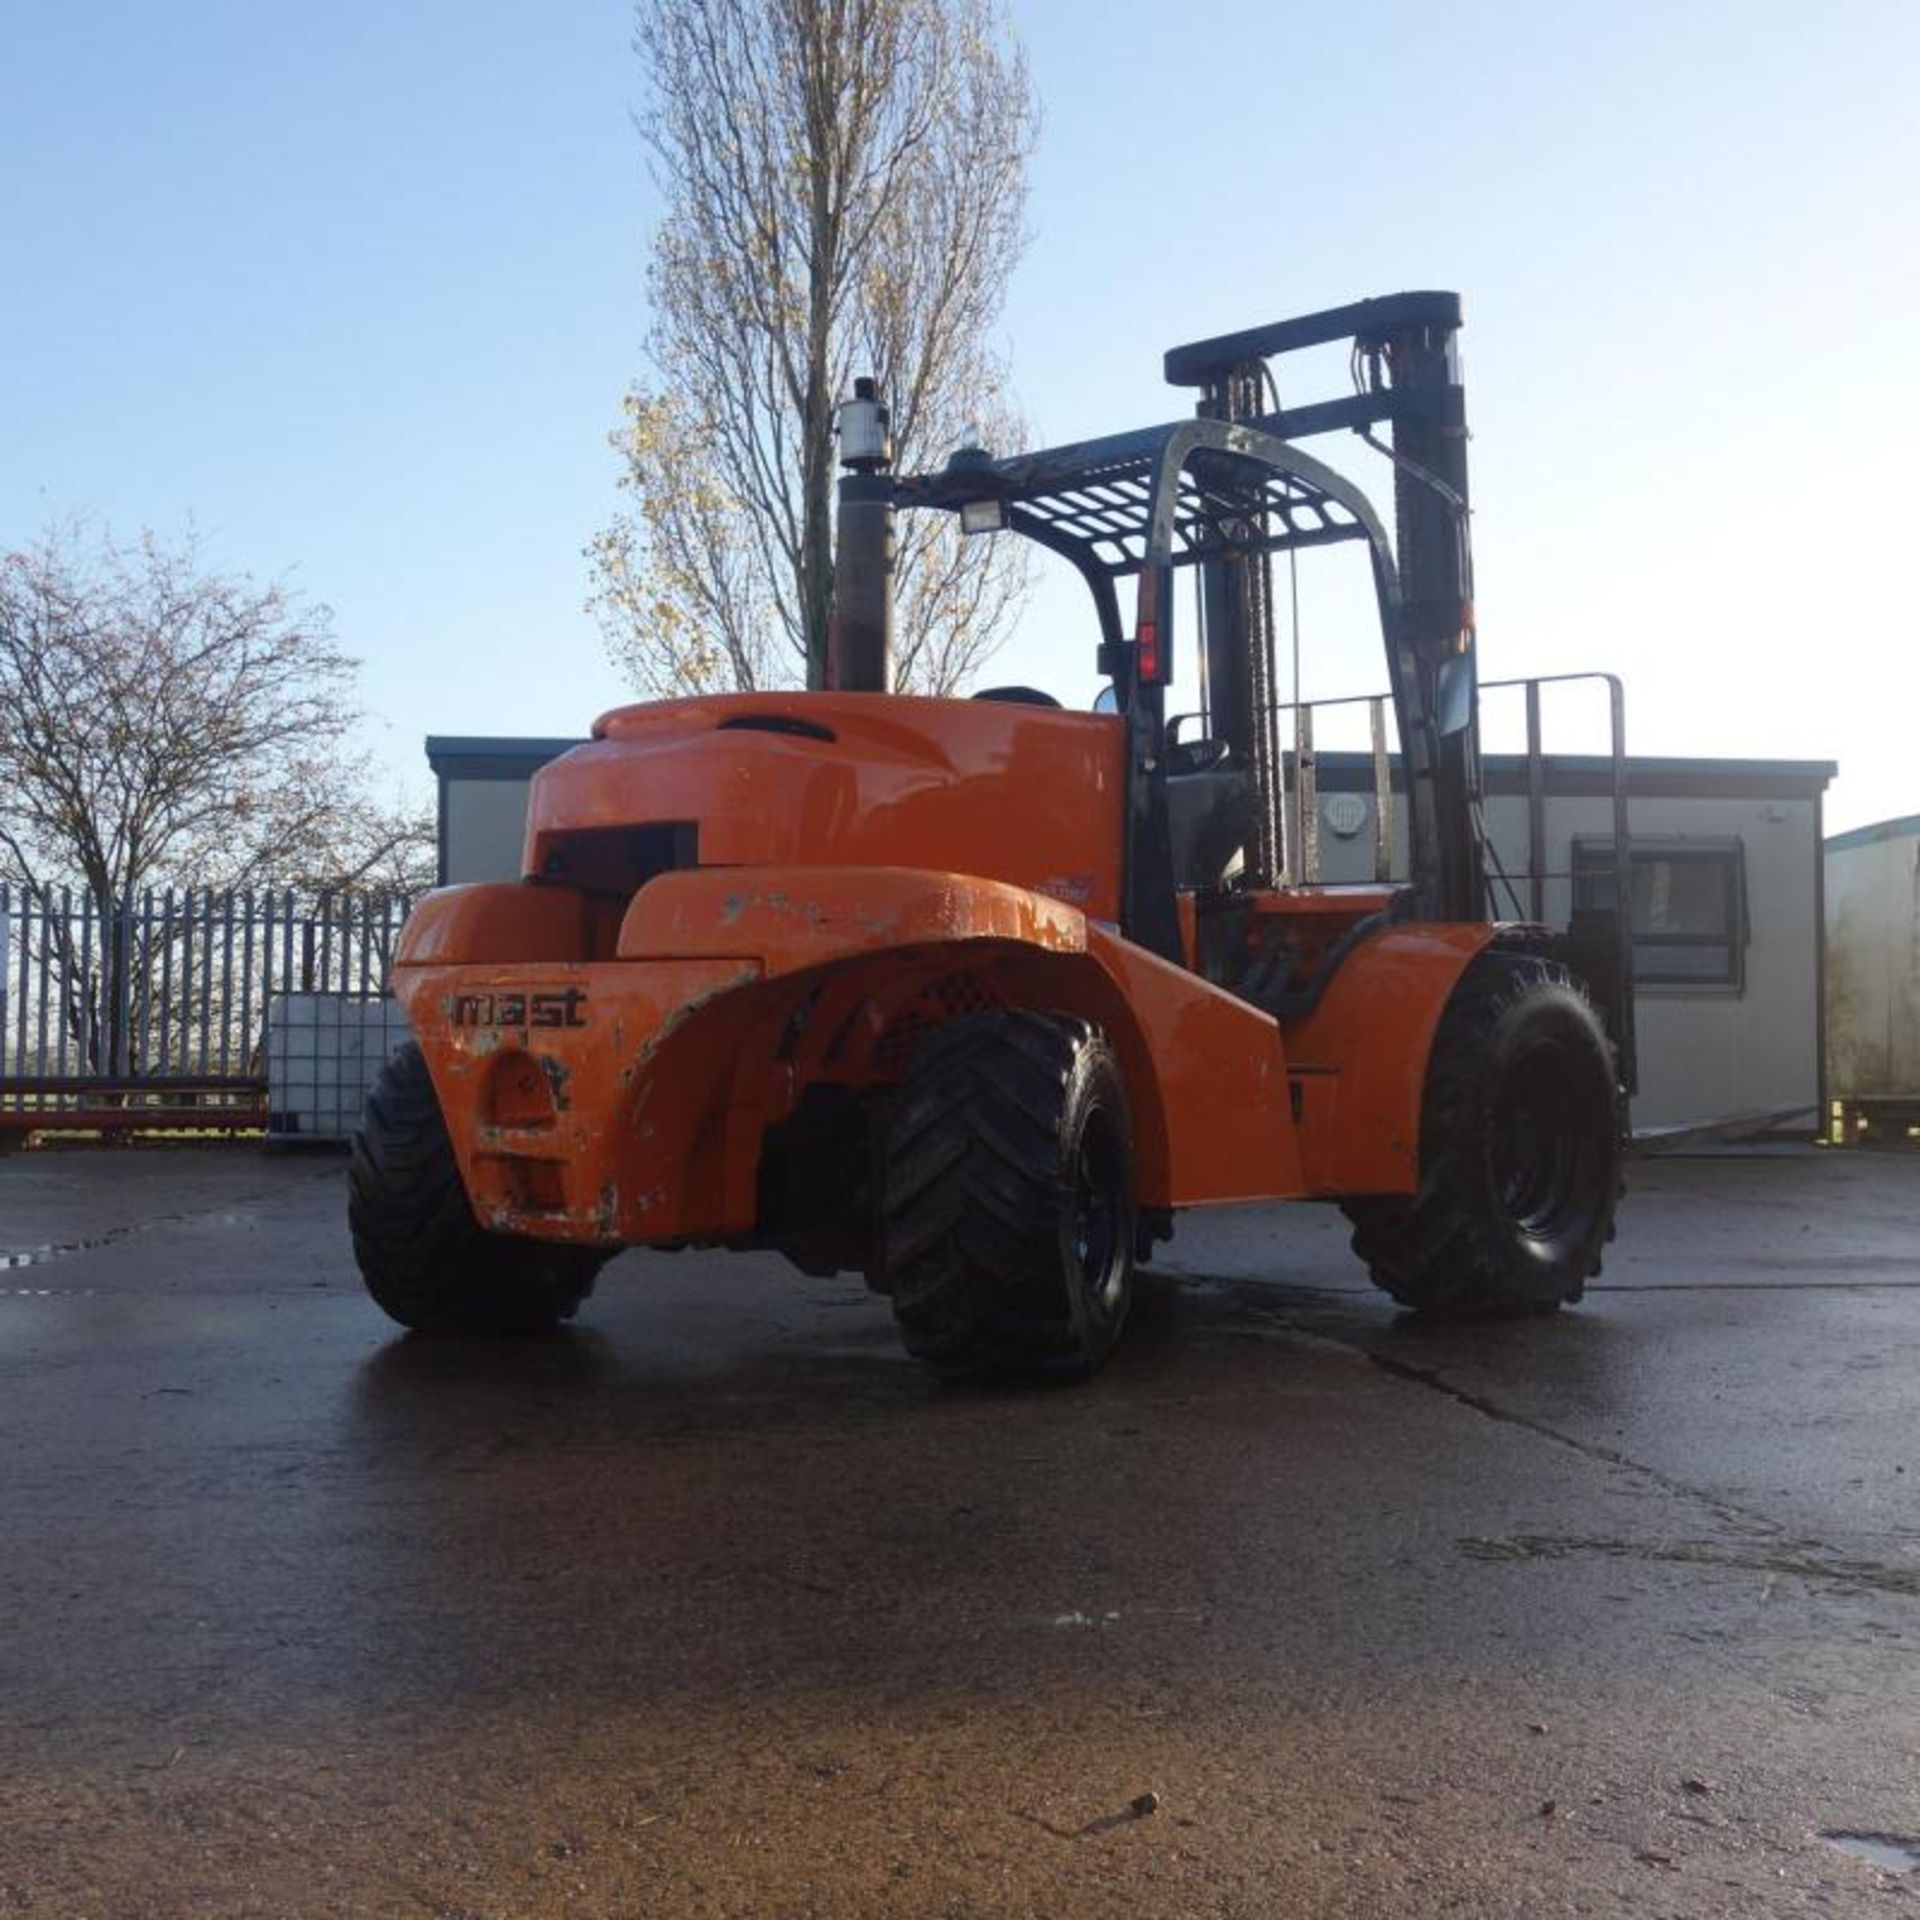 2011 MAST H50DA 4WD 5 Tonne 4x4 Forklift, Two Stage Mask - Image 6 of 11